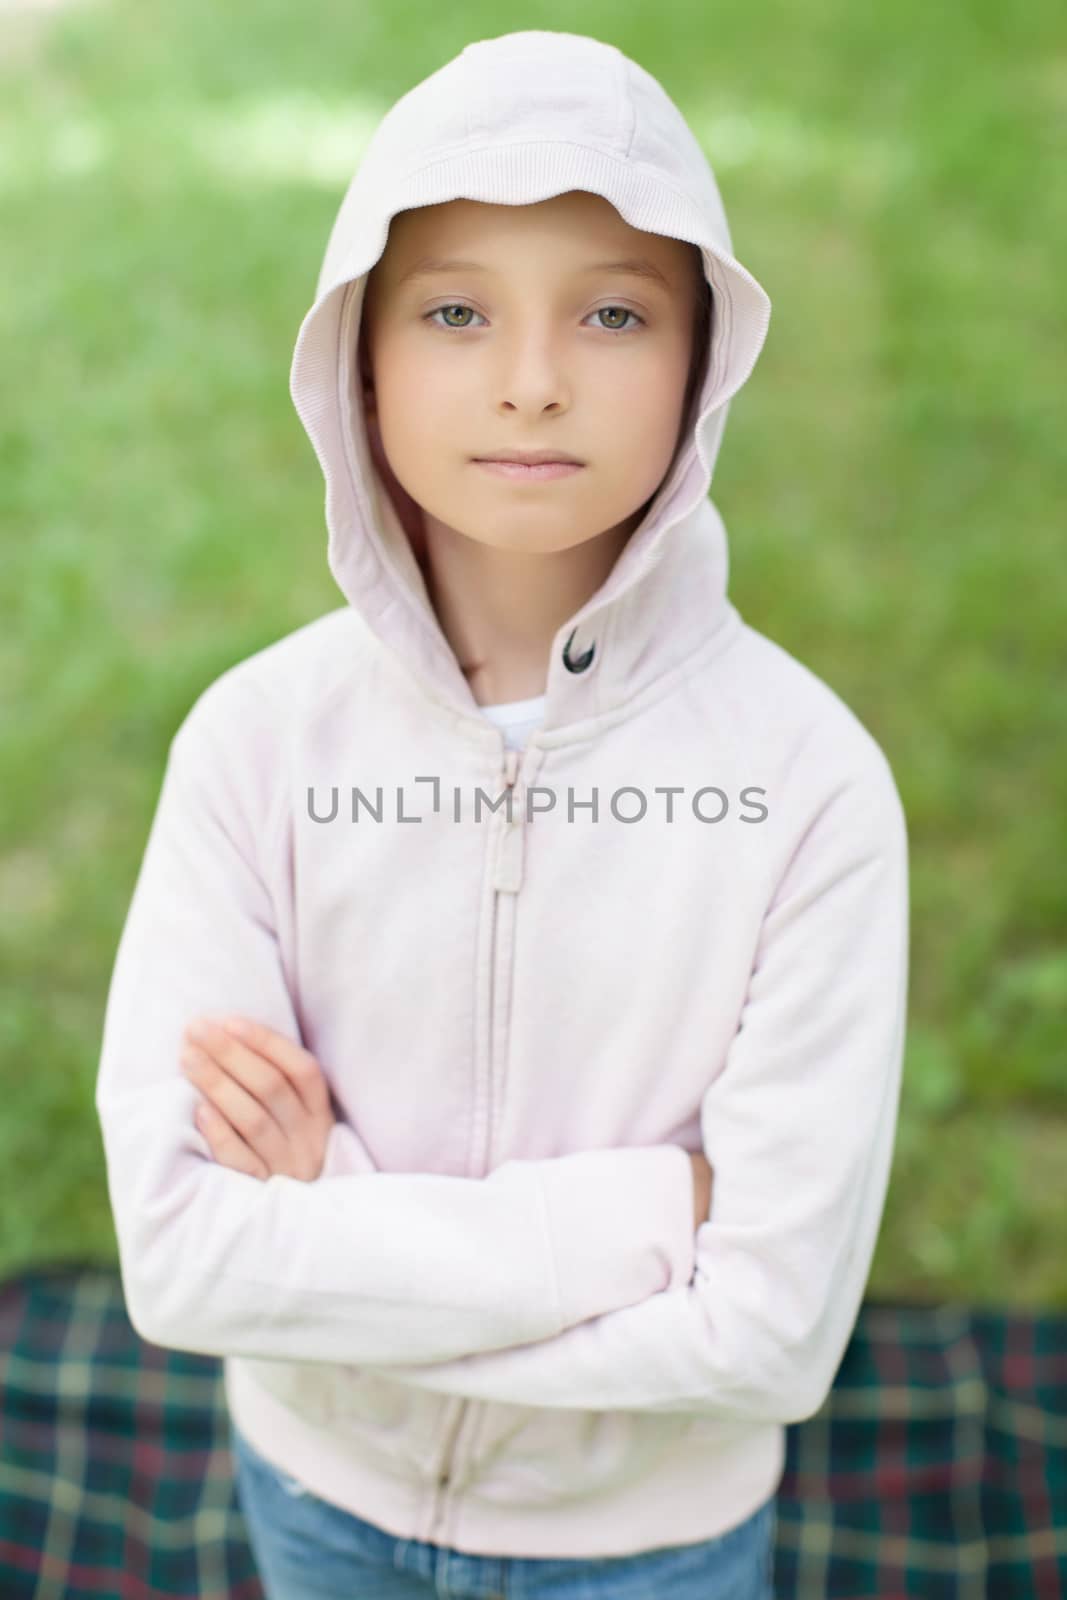 The girl in pink sweater outdoors, portrait